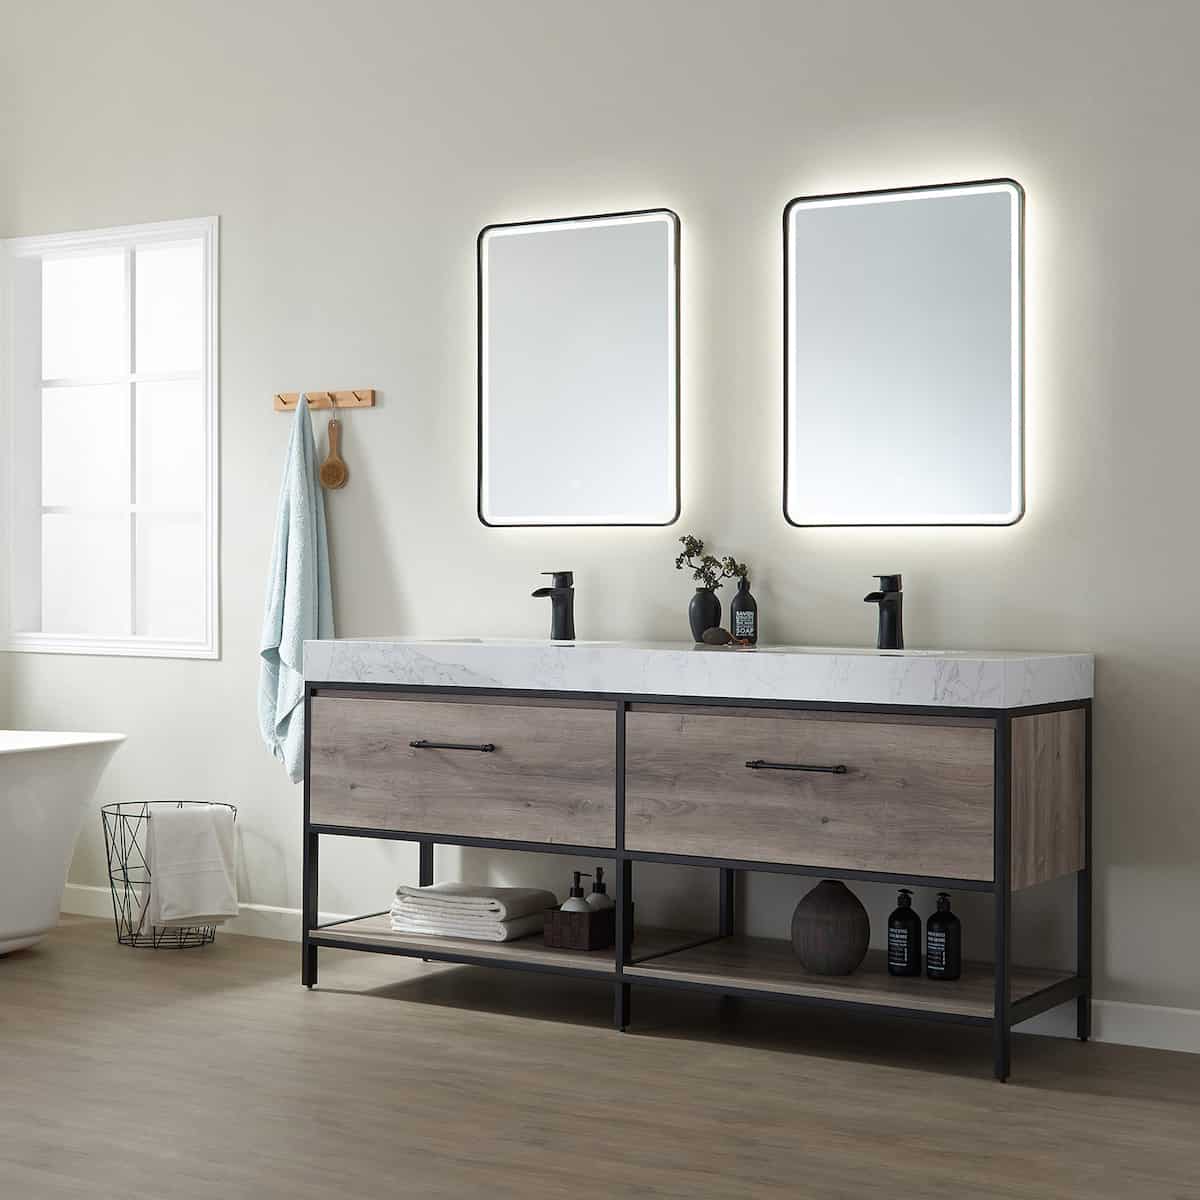 Vinnova Palma 72 Inch Freestanding Double Vanity in Mexican Oak with White Composite Grain Stone Countertop With Mirrors Side 701272-MXO-GW